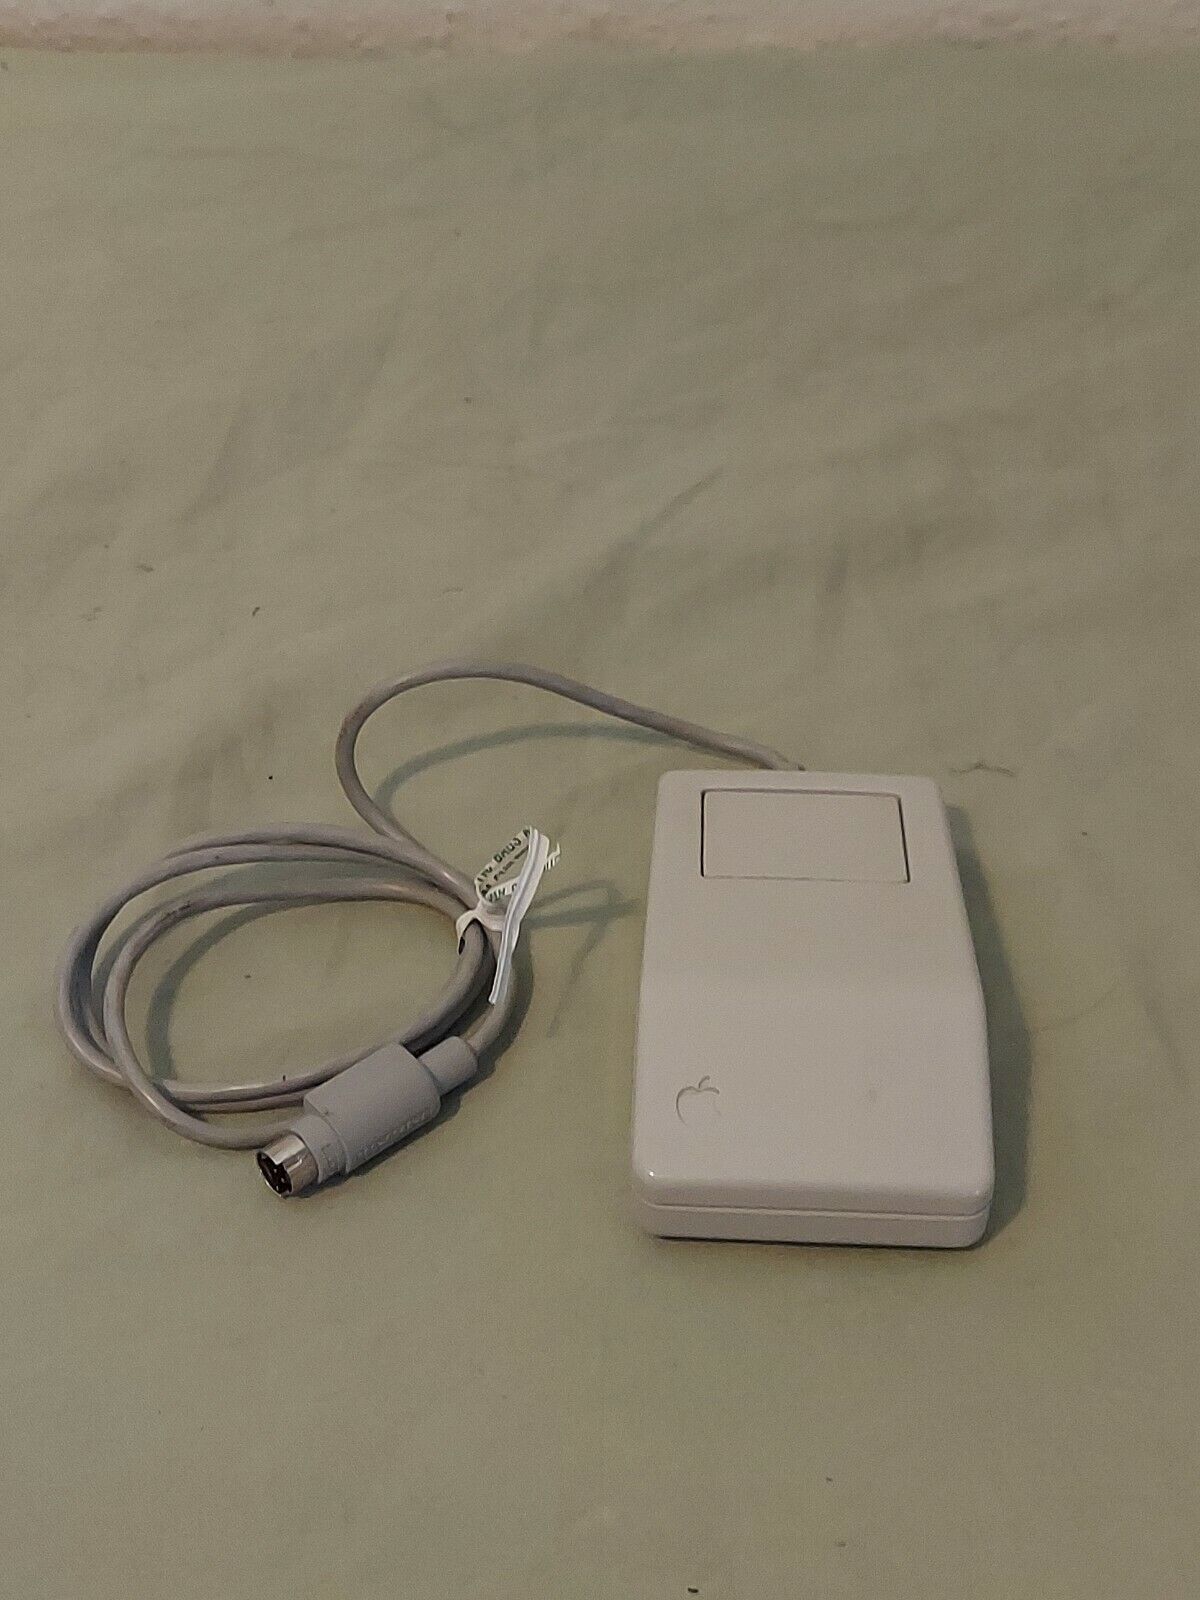 Vintage Apple G5431 Desktop Bus Mouse One Button Malaysia - Tested Working QTY